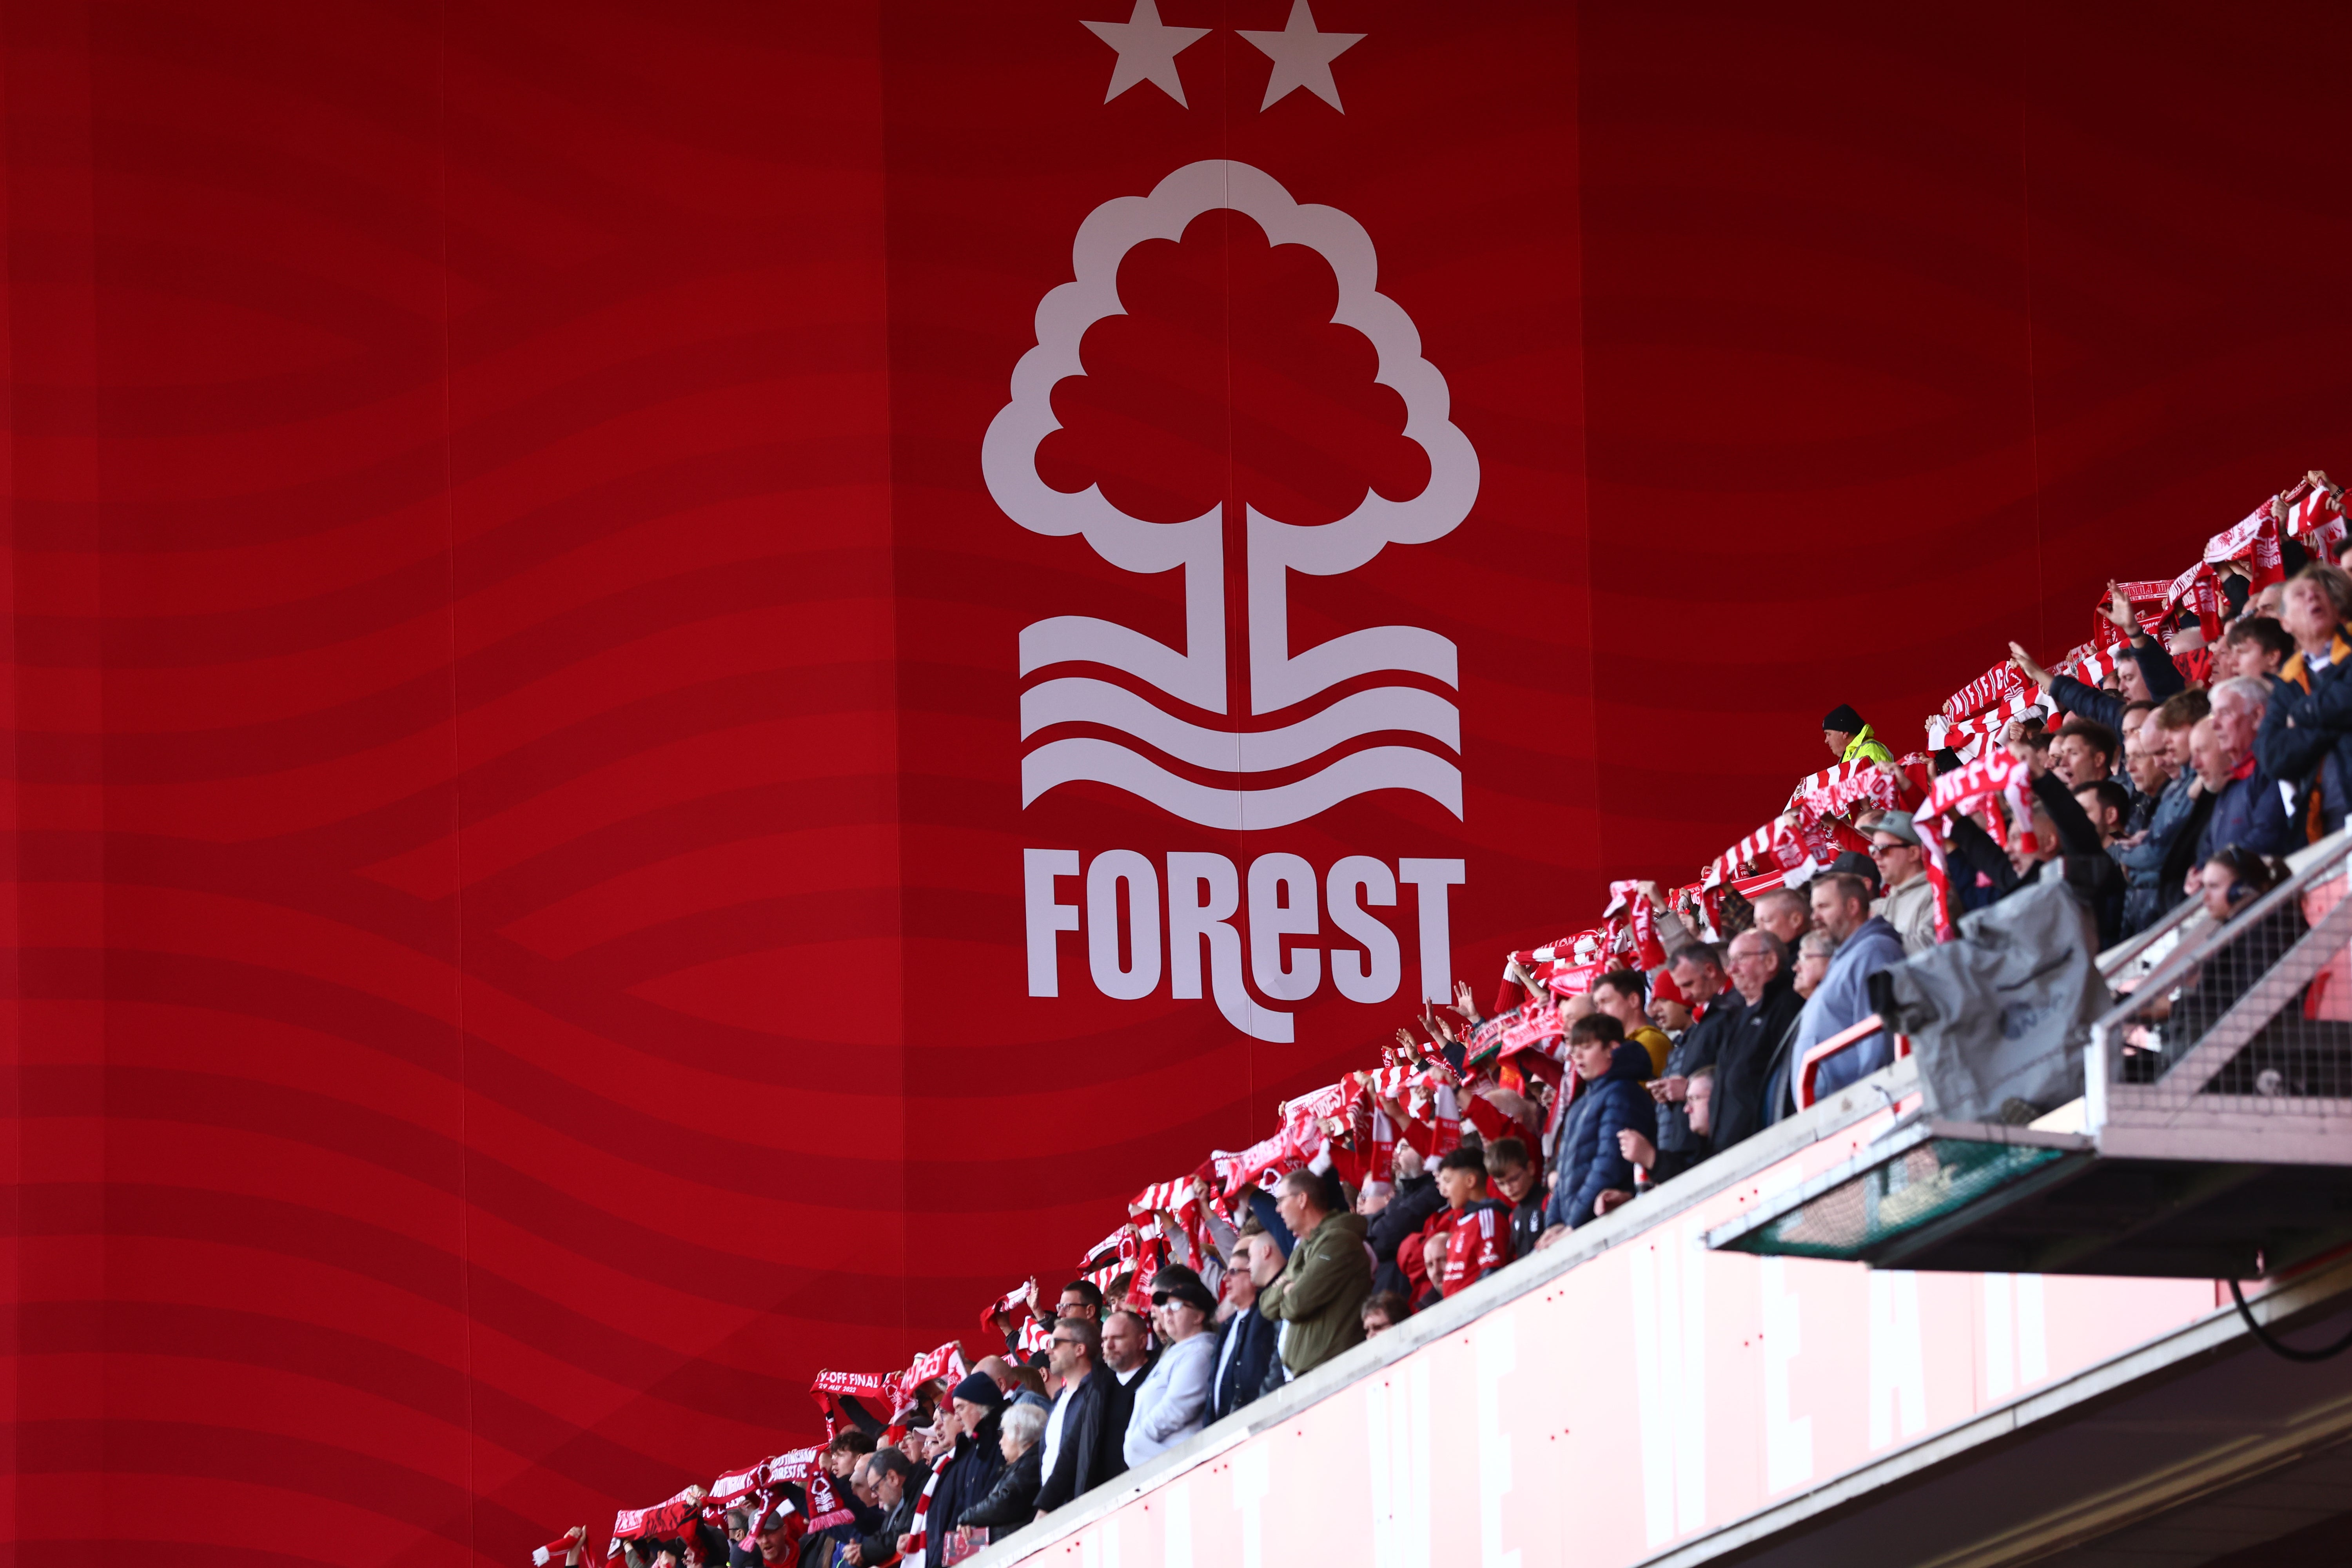 Nottingham Forest accused a Premier League official of bias in a controversial statement